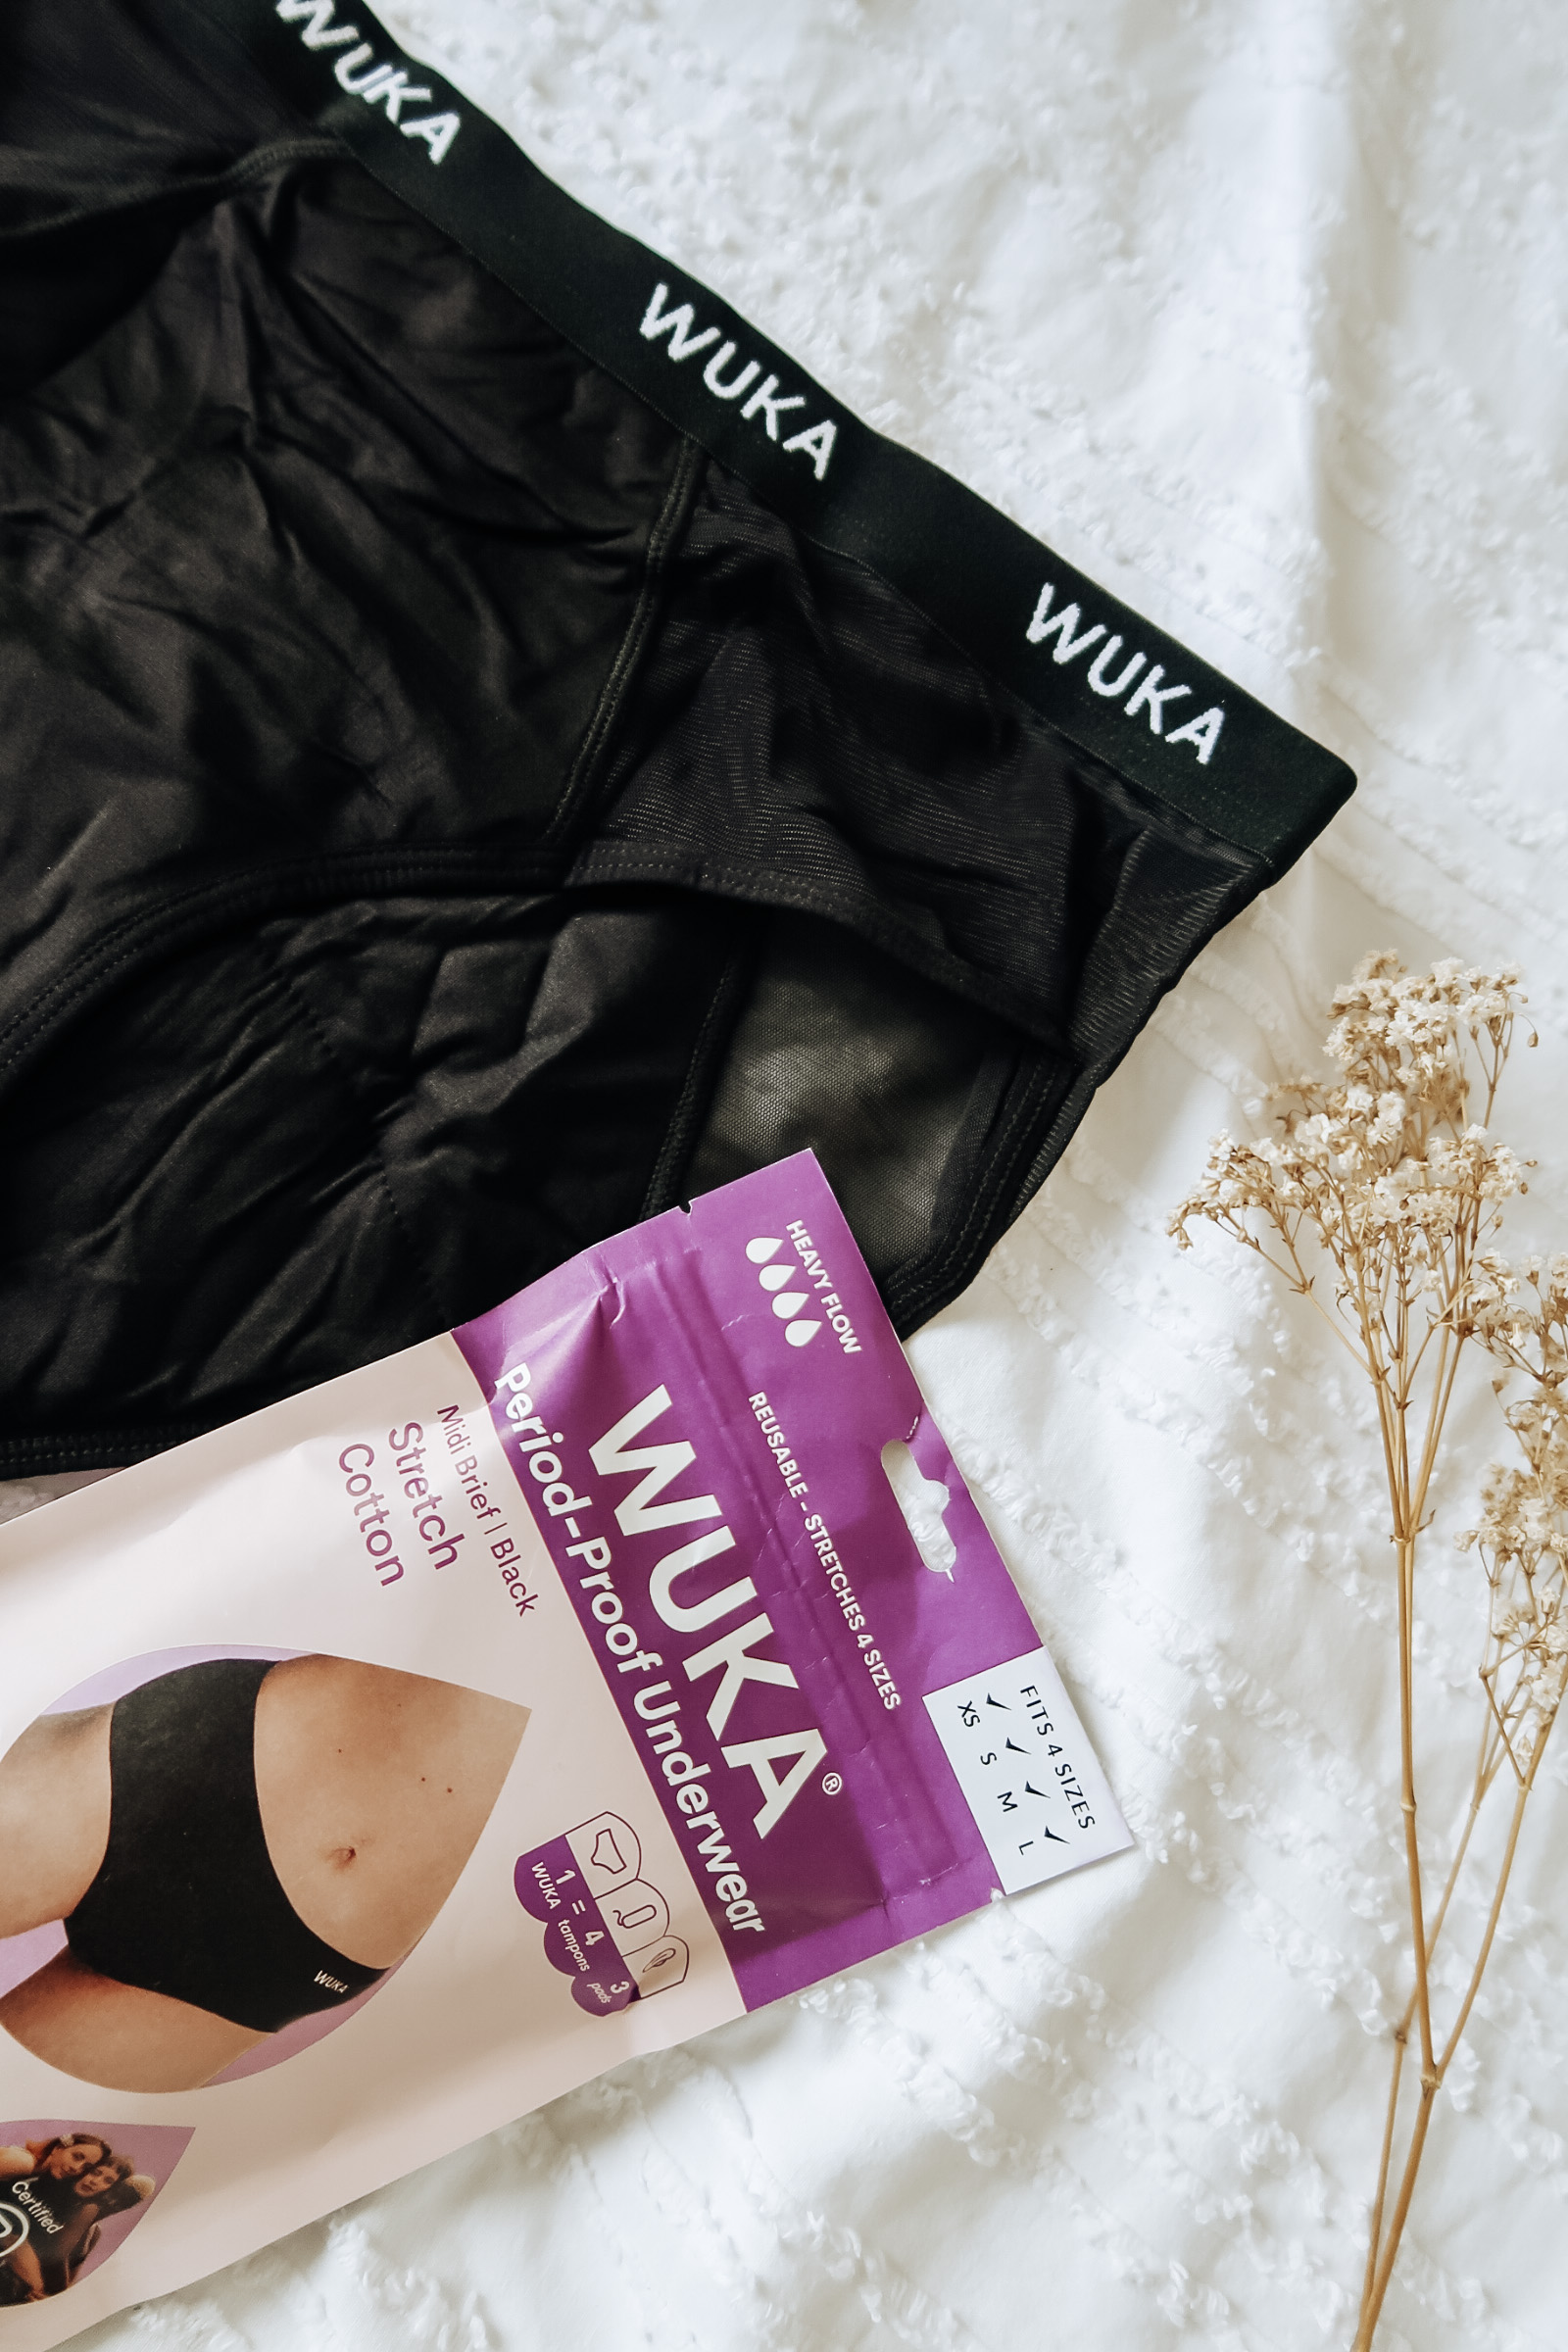 WUKA Period Pants: A Review Of The Sustainable Period Pants - Lucy Mary